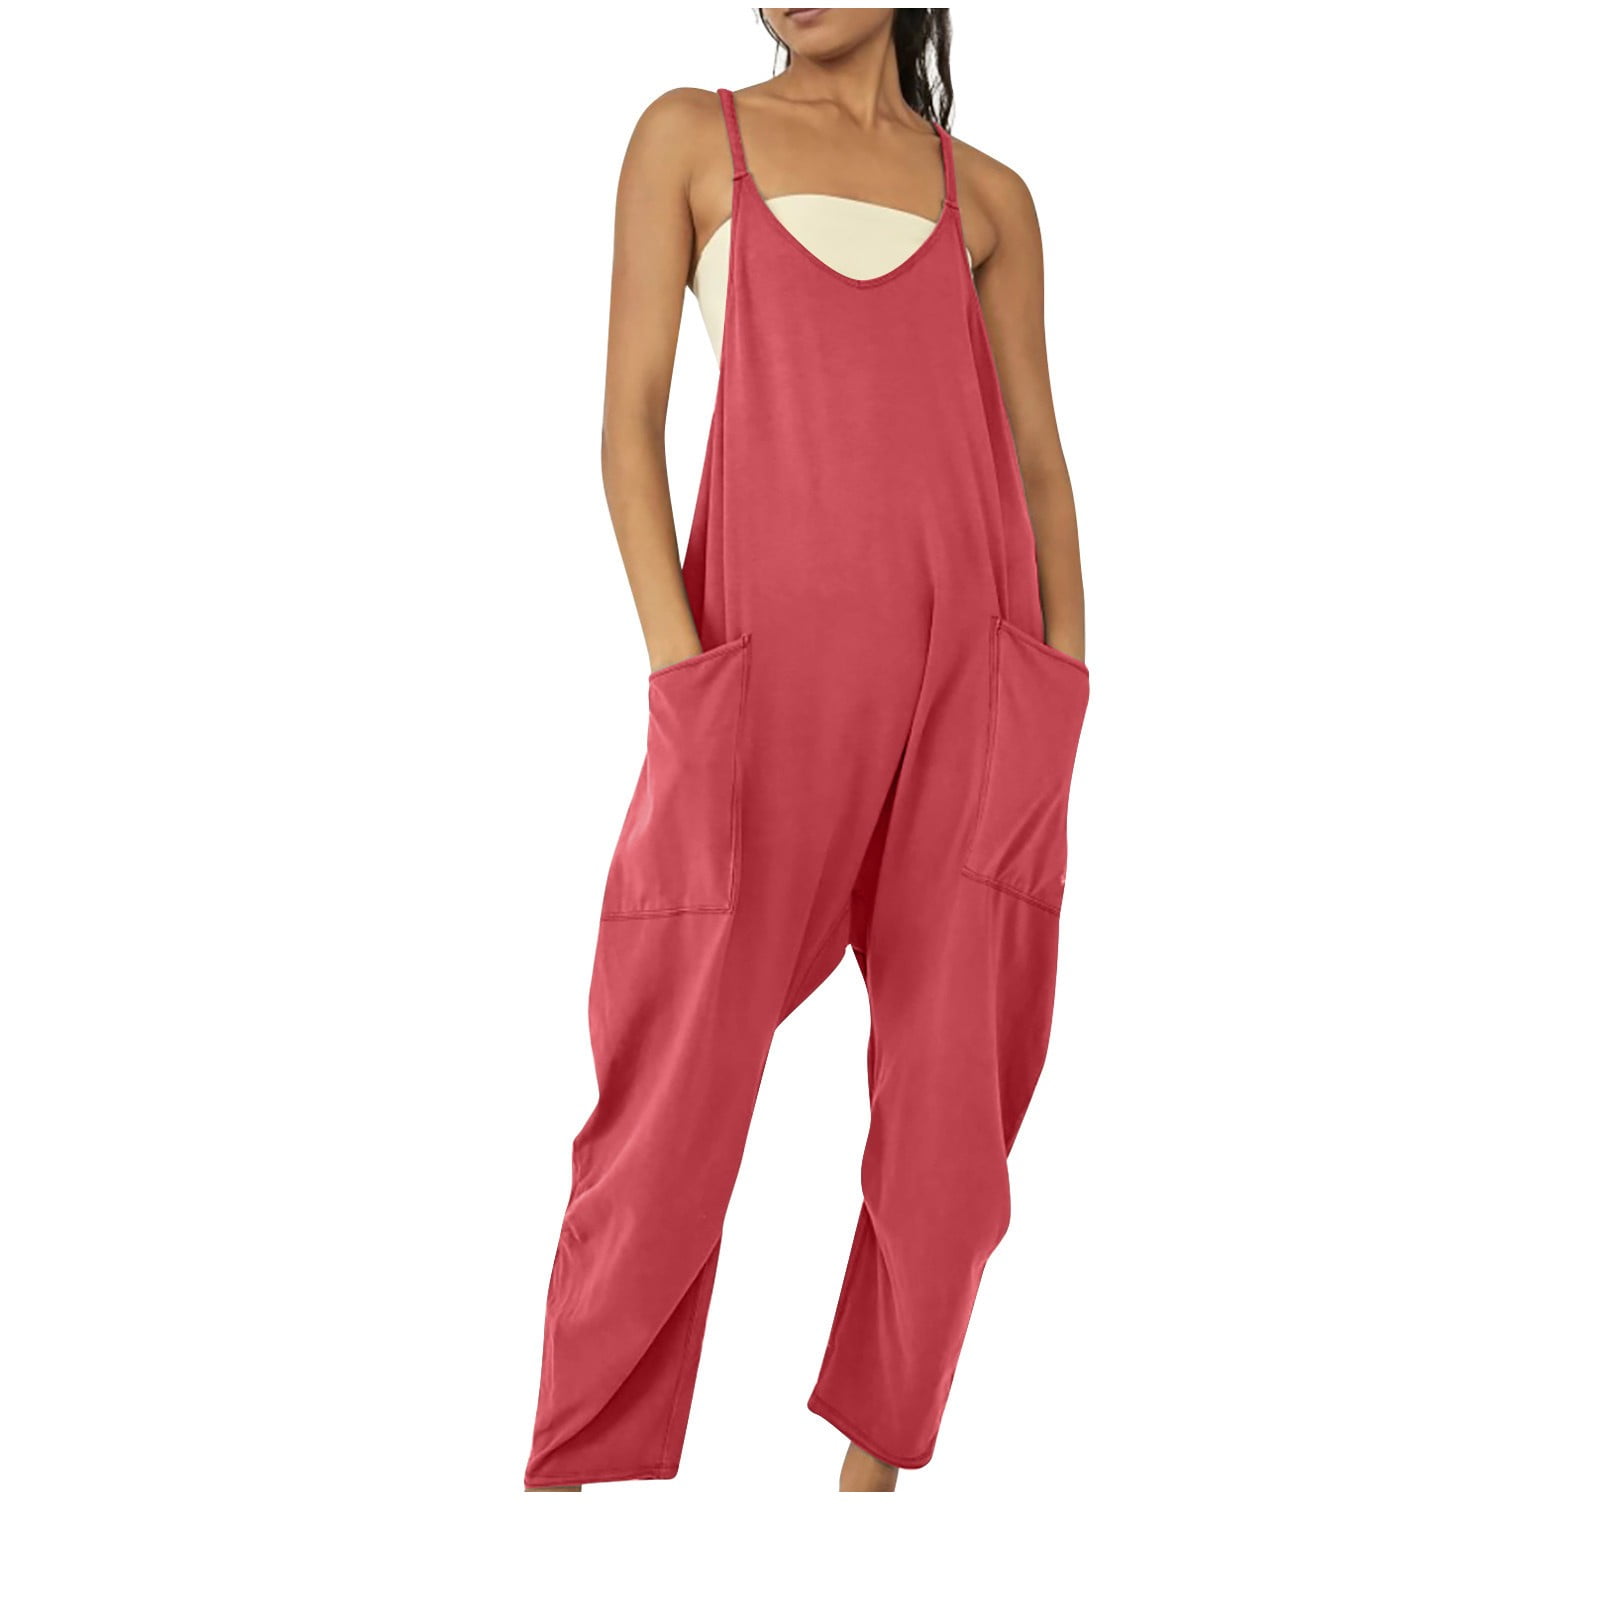 JURANMO Womens One Piece Jumpsuit Casual Spaghtti Strap Solid